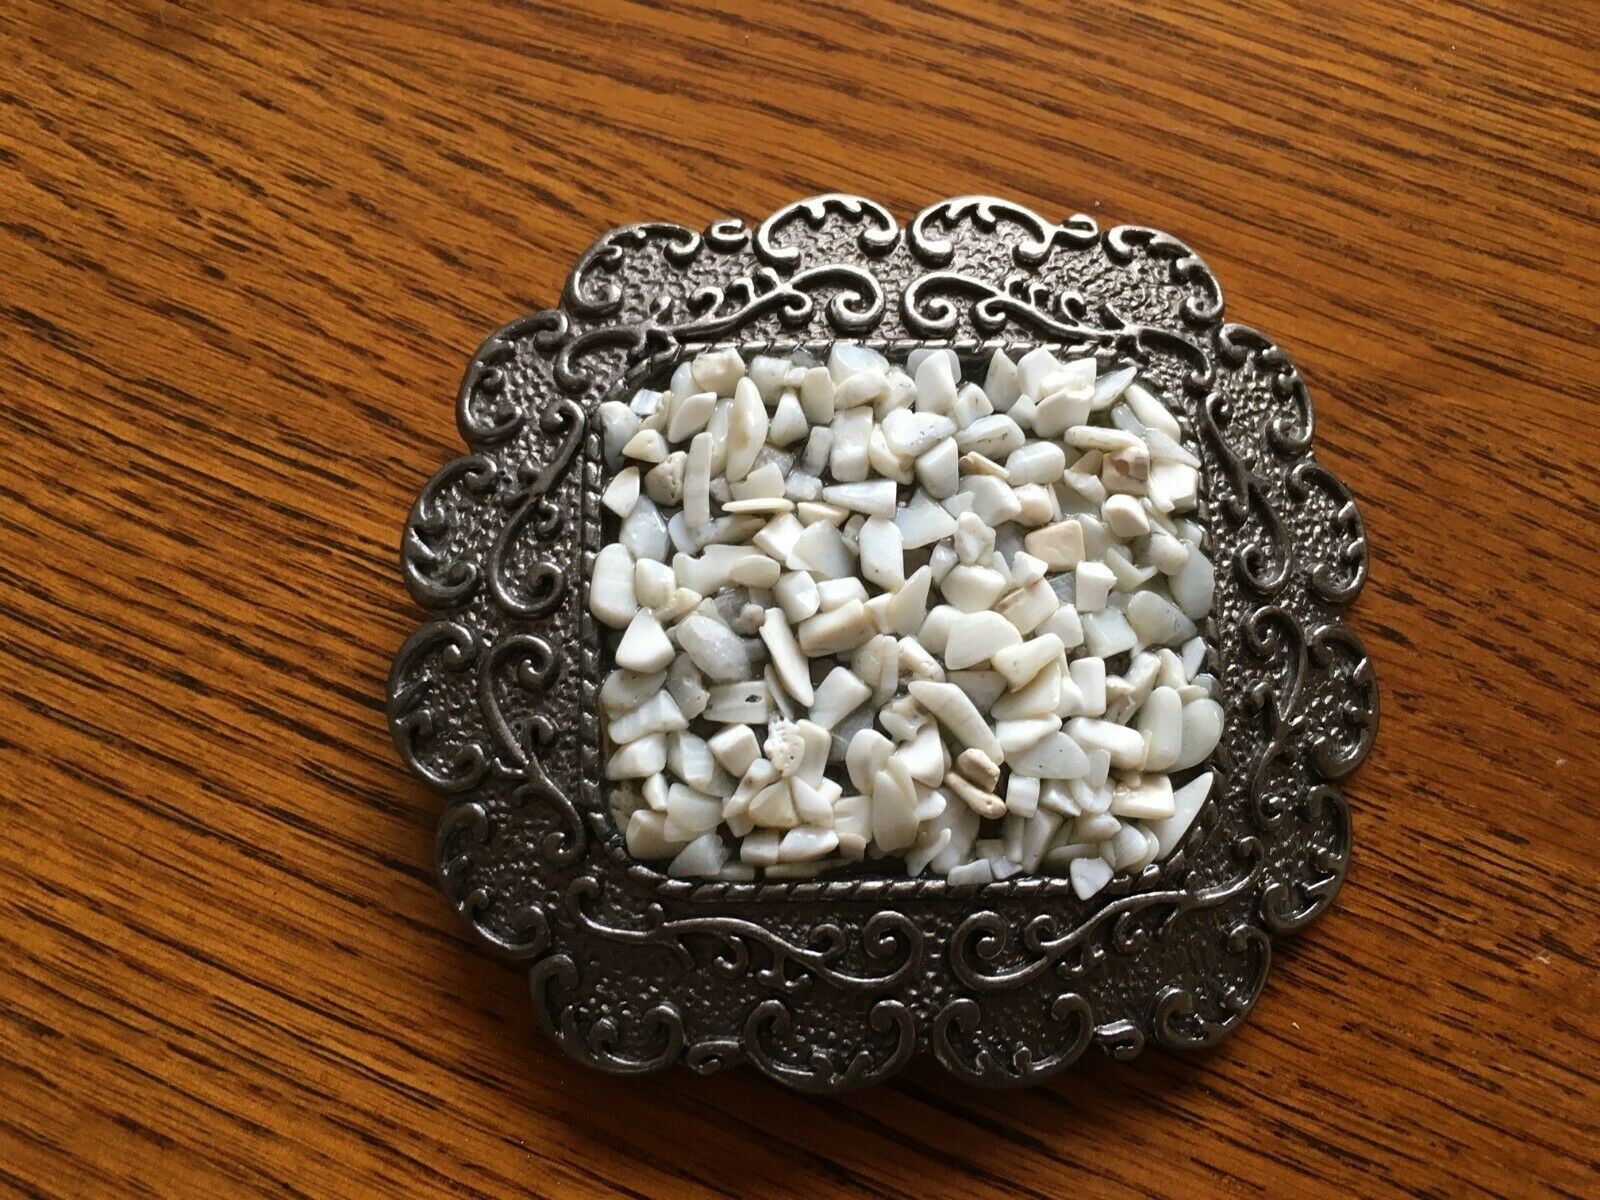 Women's Belt Buckle - 4" X 3.5", Crushed Stones In The Center